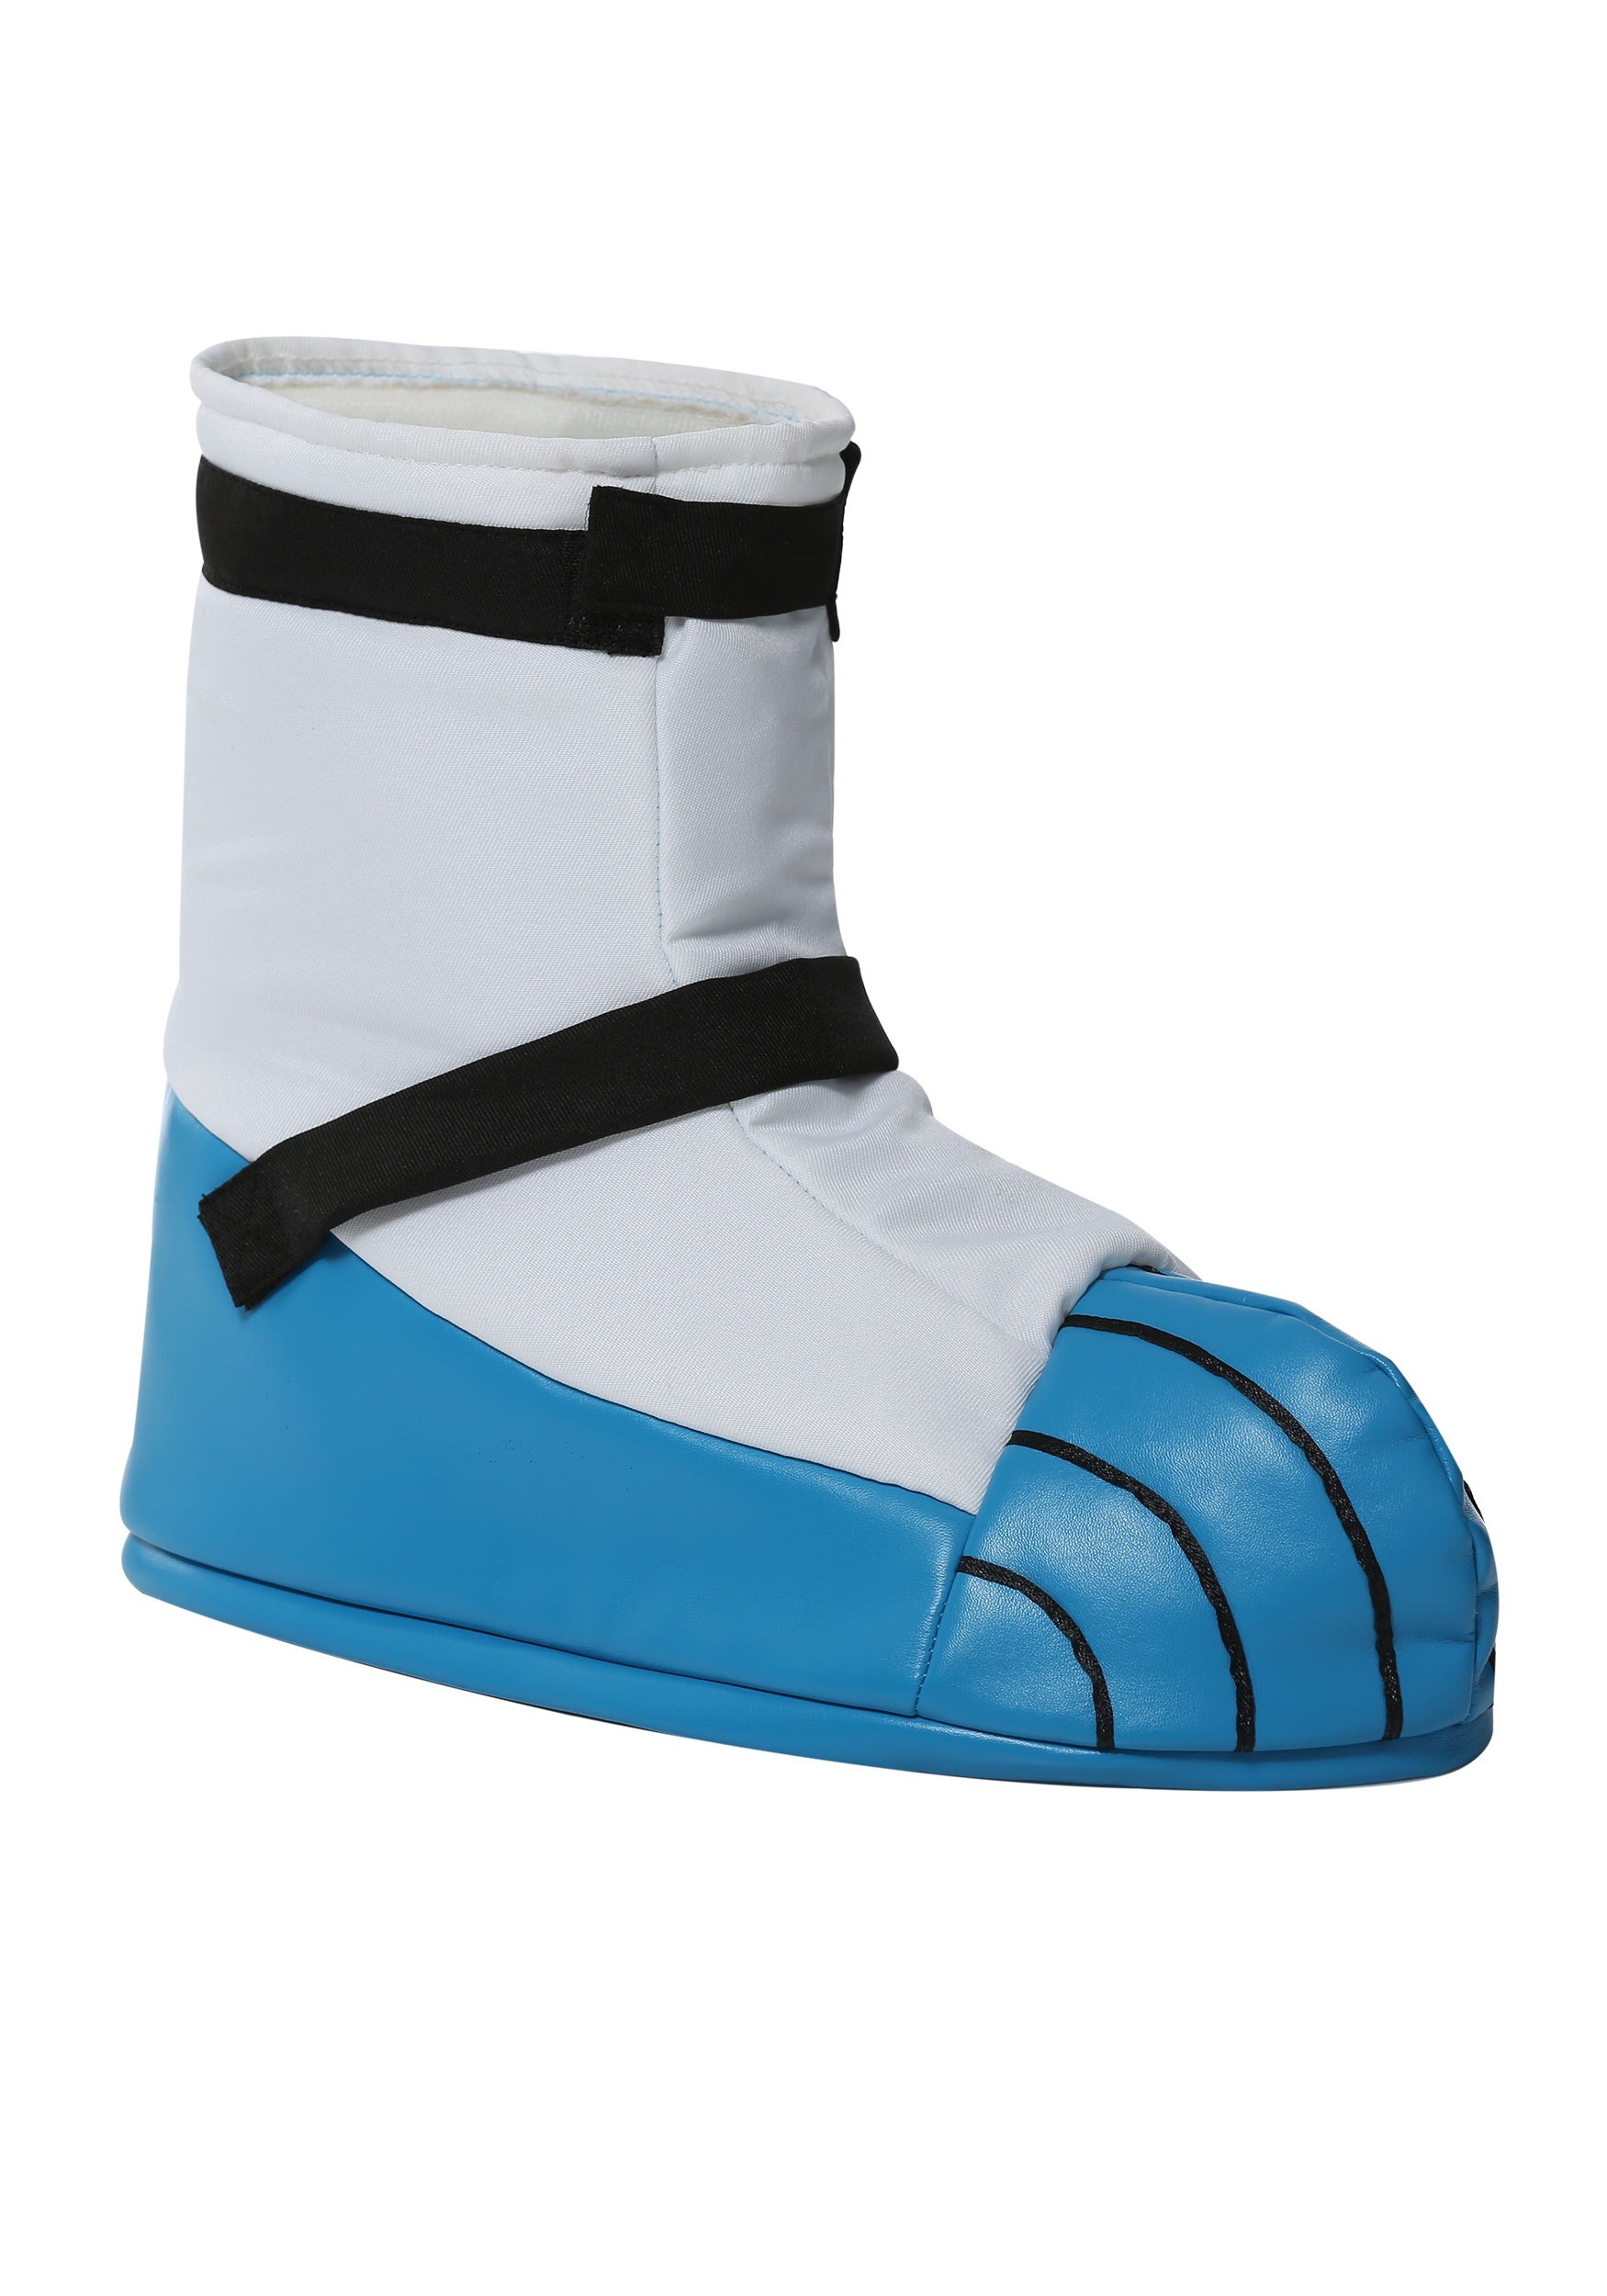 Astronaut Adult Boots